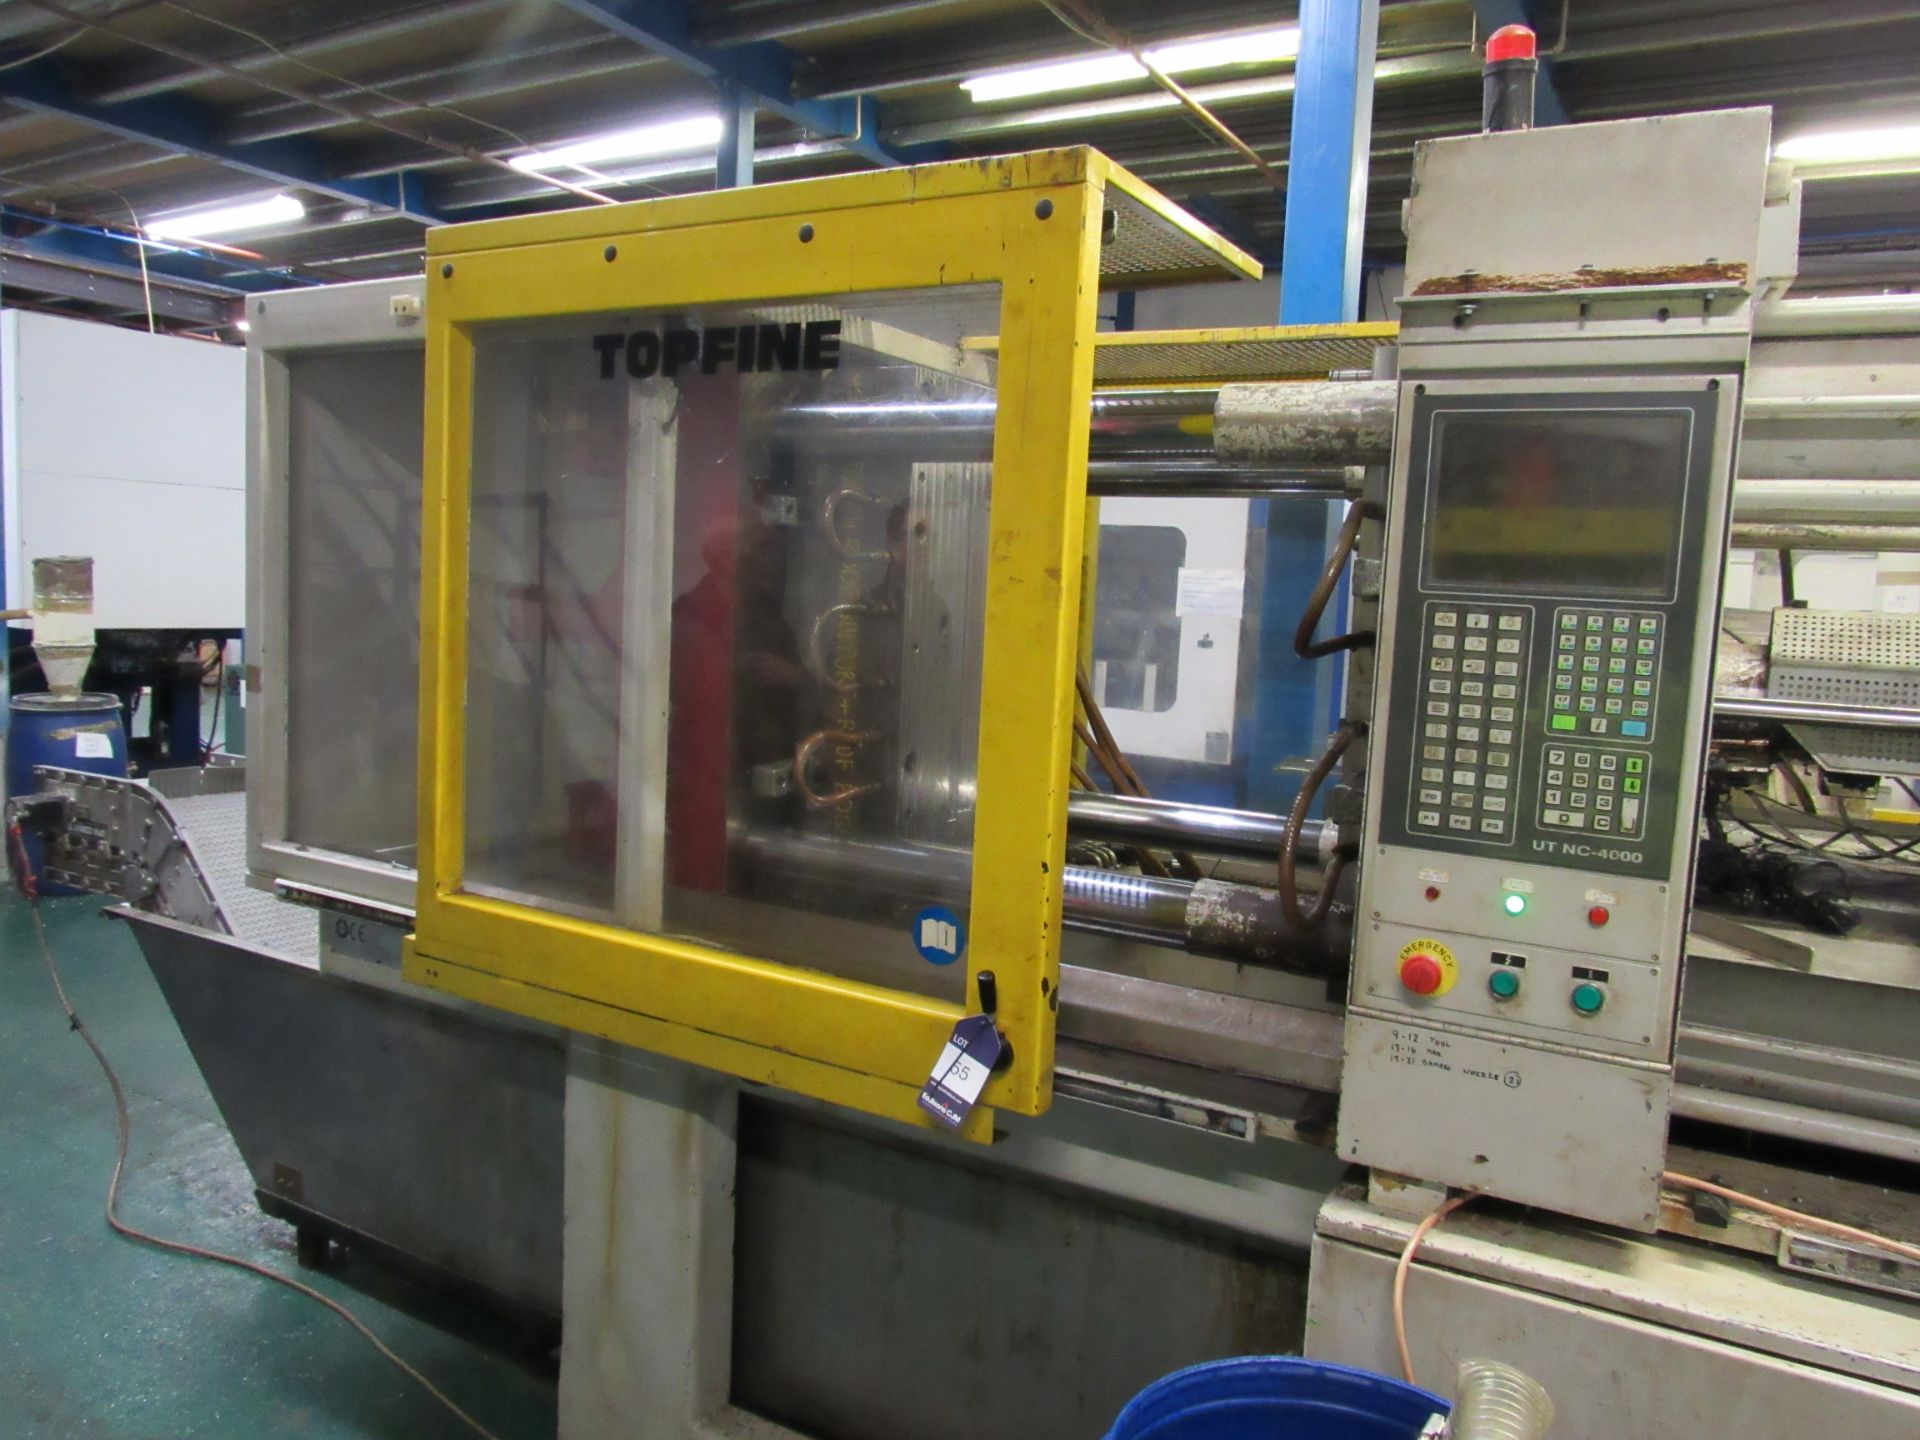 Topfine A180 Injection Moulding Machine M38-04, Serial 4950, 2006 with Shini / moretto dosing unit - Image 4 of 6